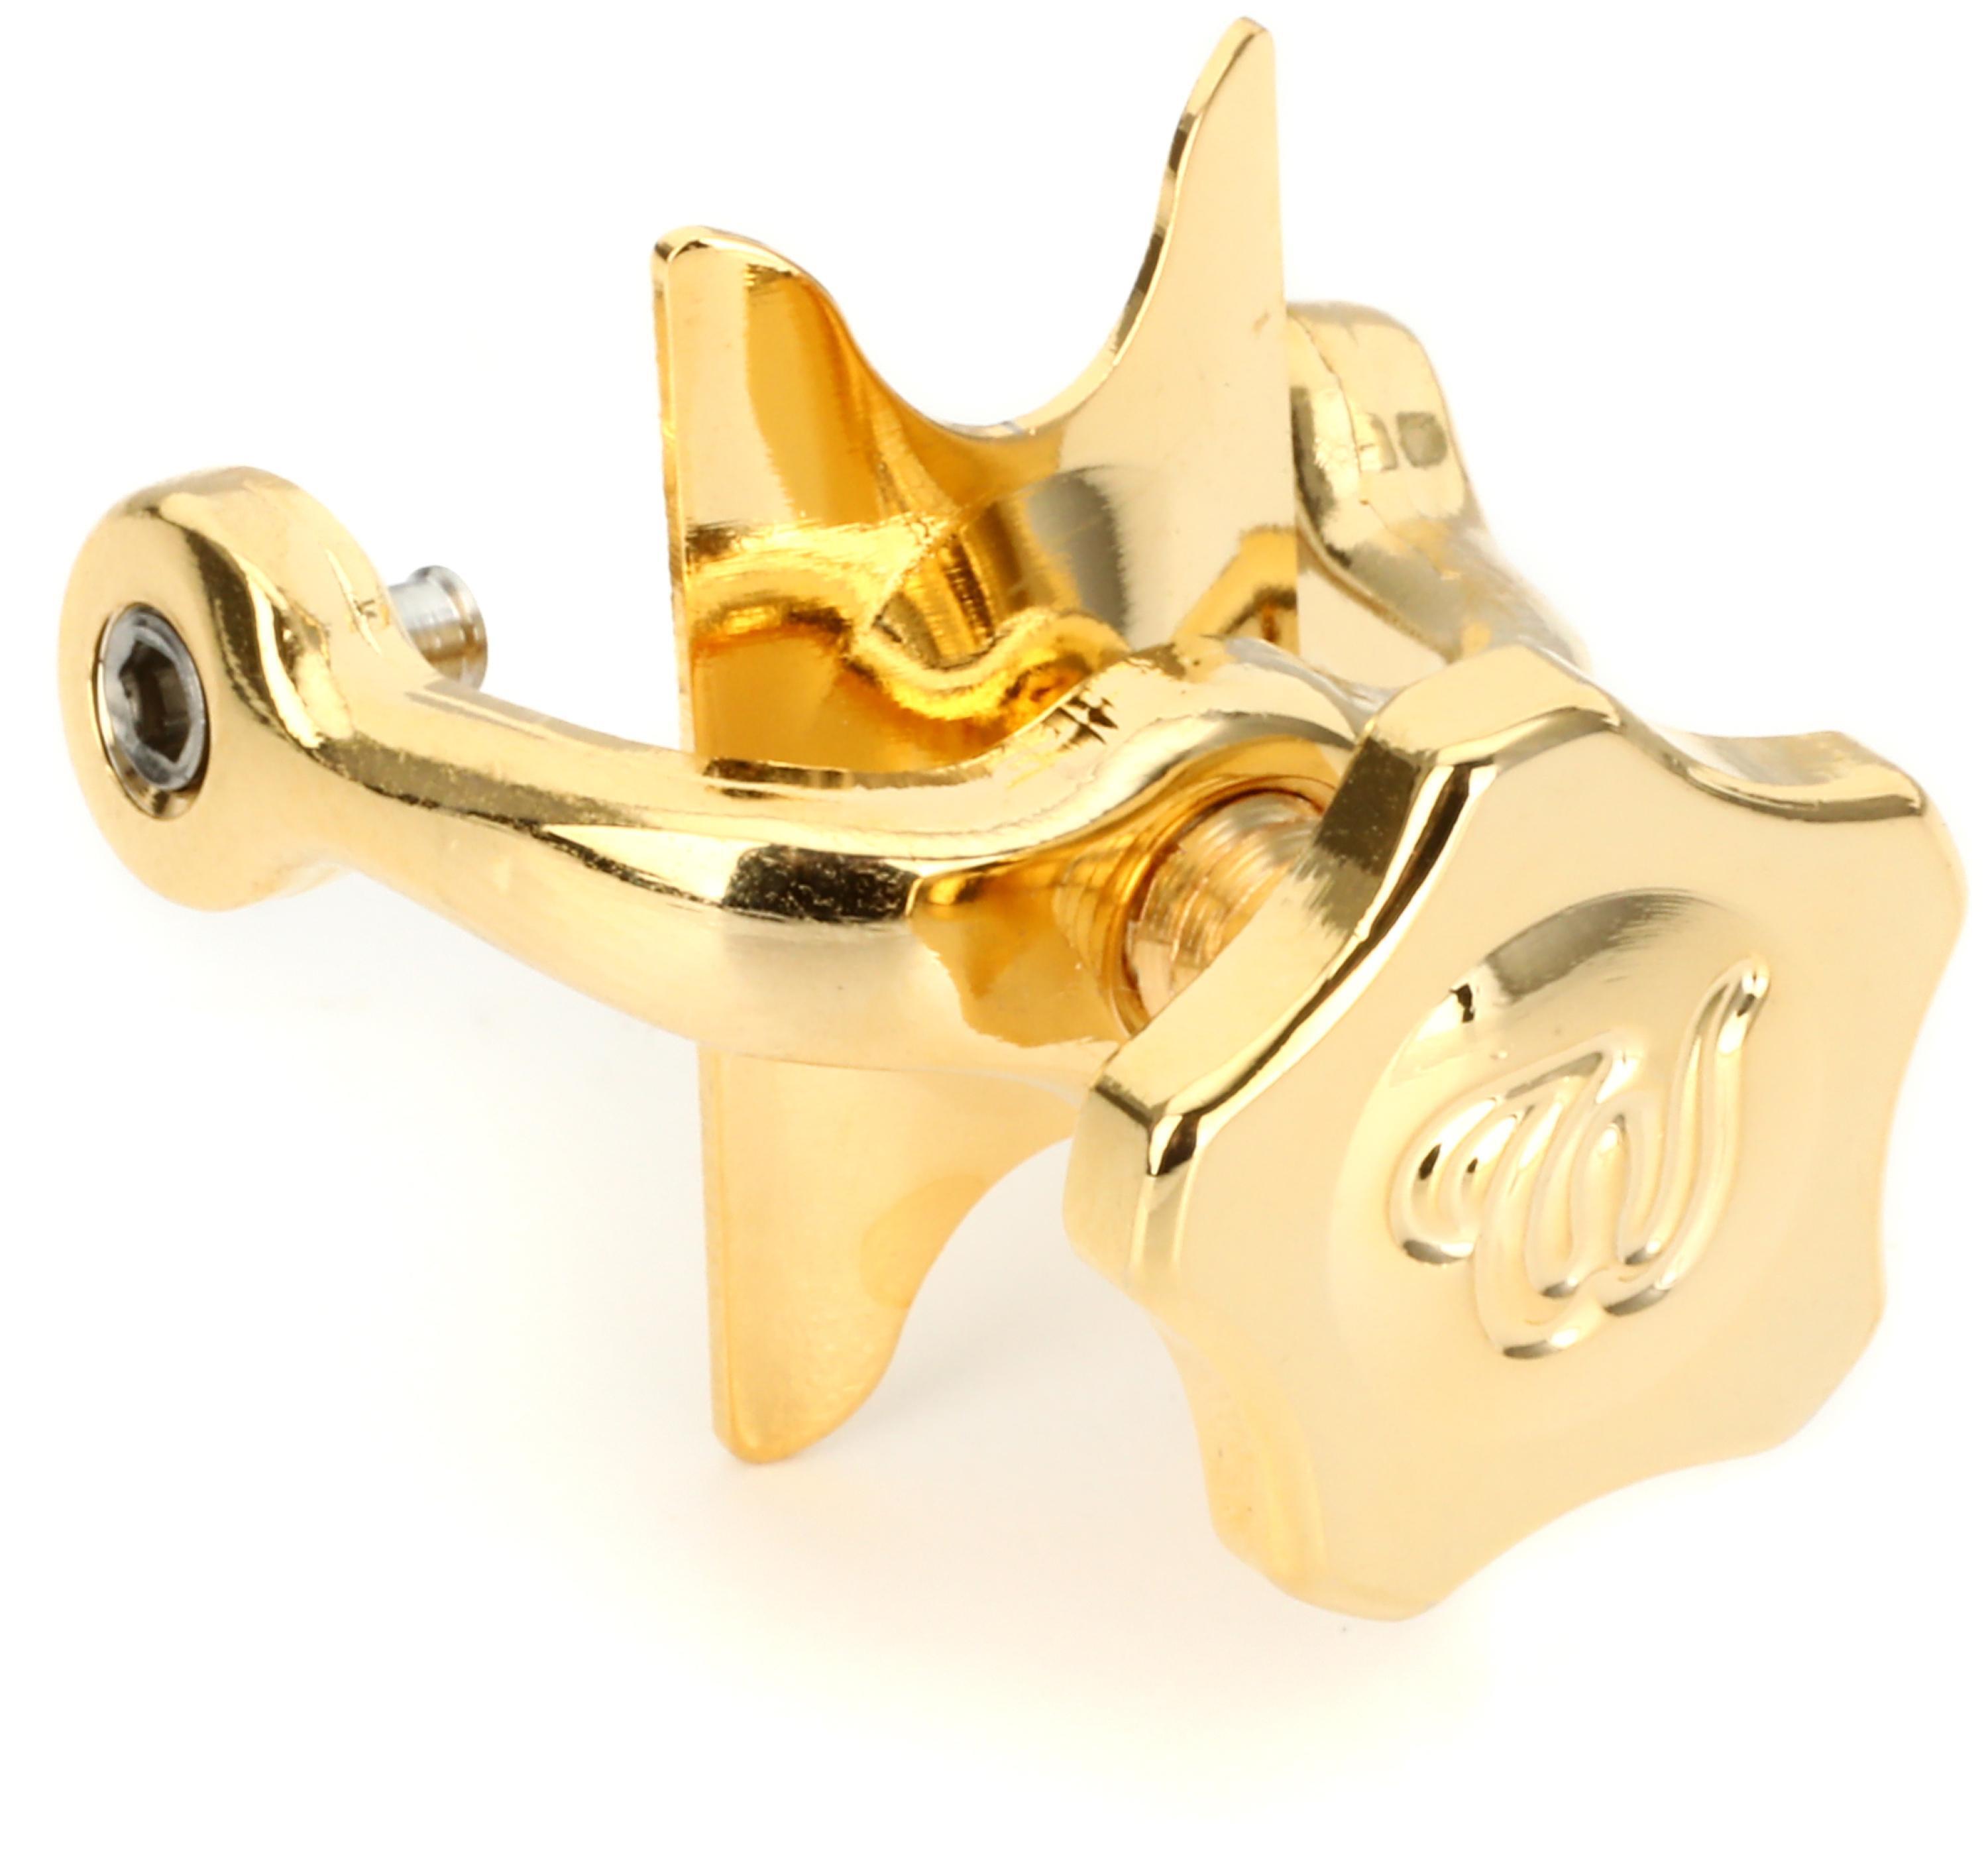 Theo Wanne LIG-LLG Liberty Saxophone Ligature - Gold | Sweetwater